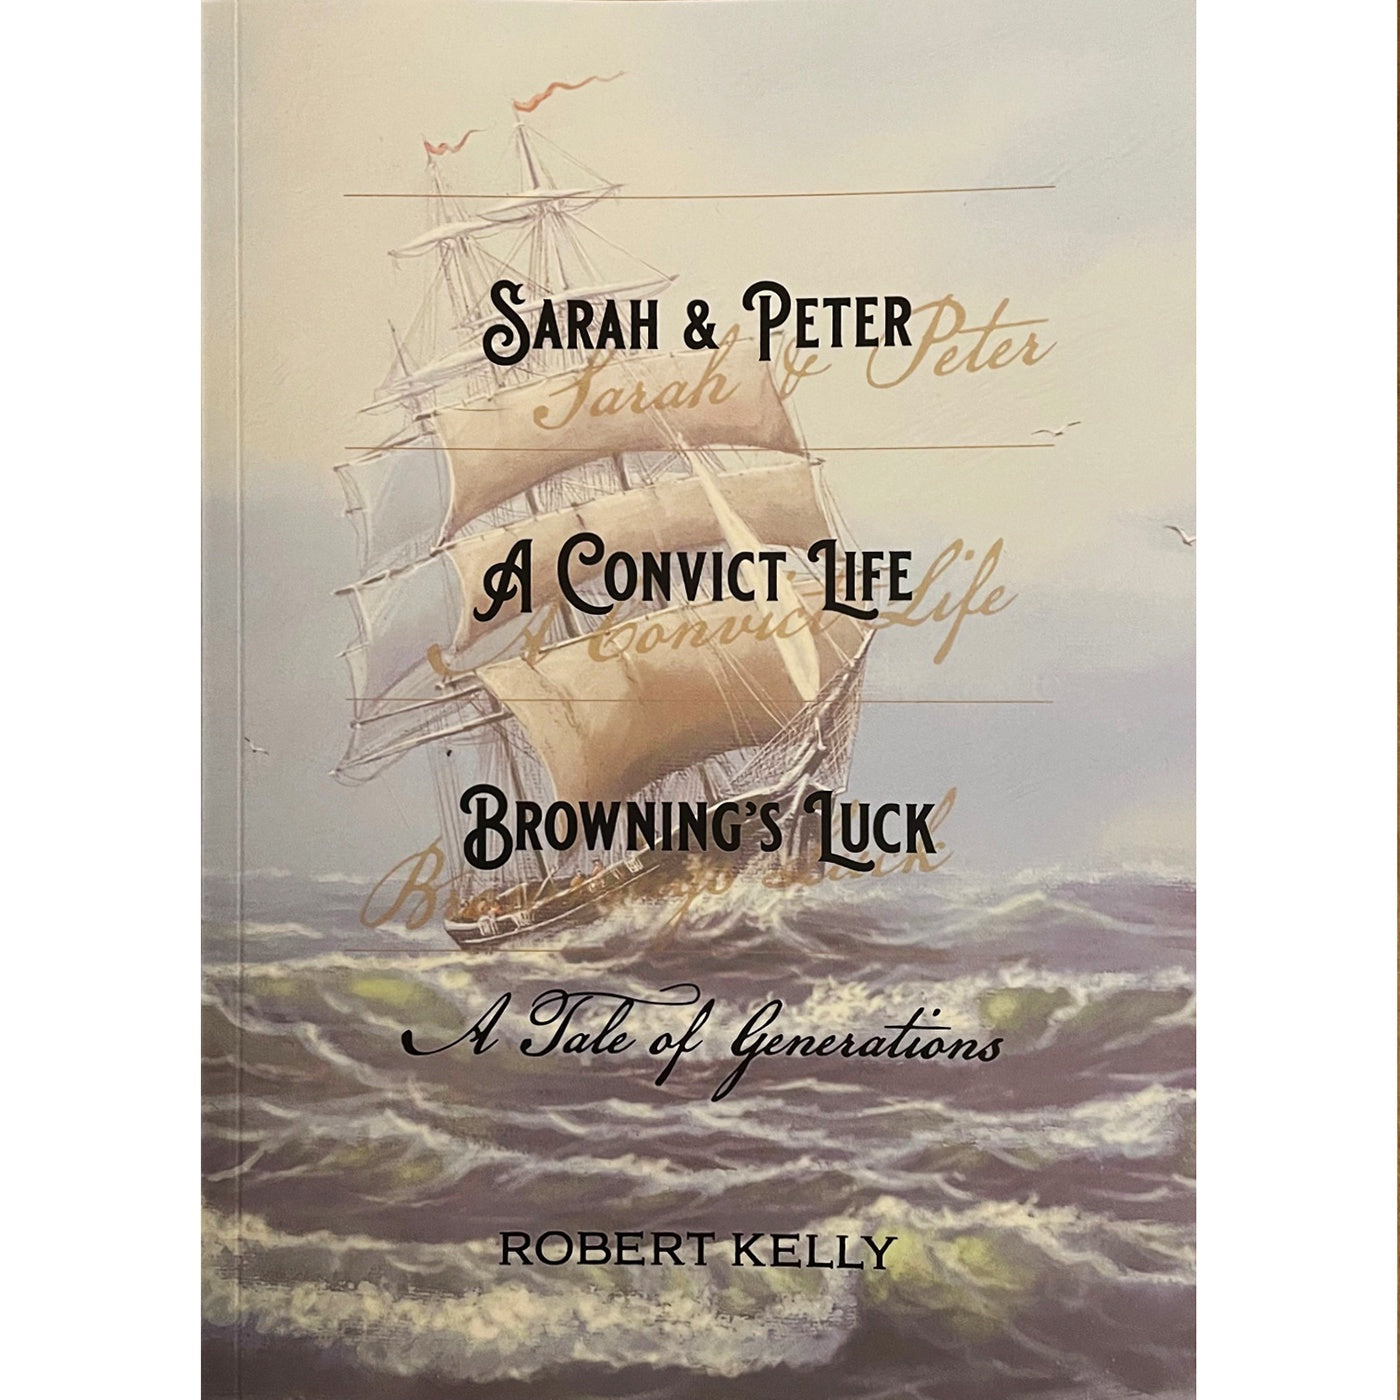 Sarah & Peter, A Convict Life, Browning's Luck - A Tale of Generations